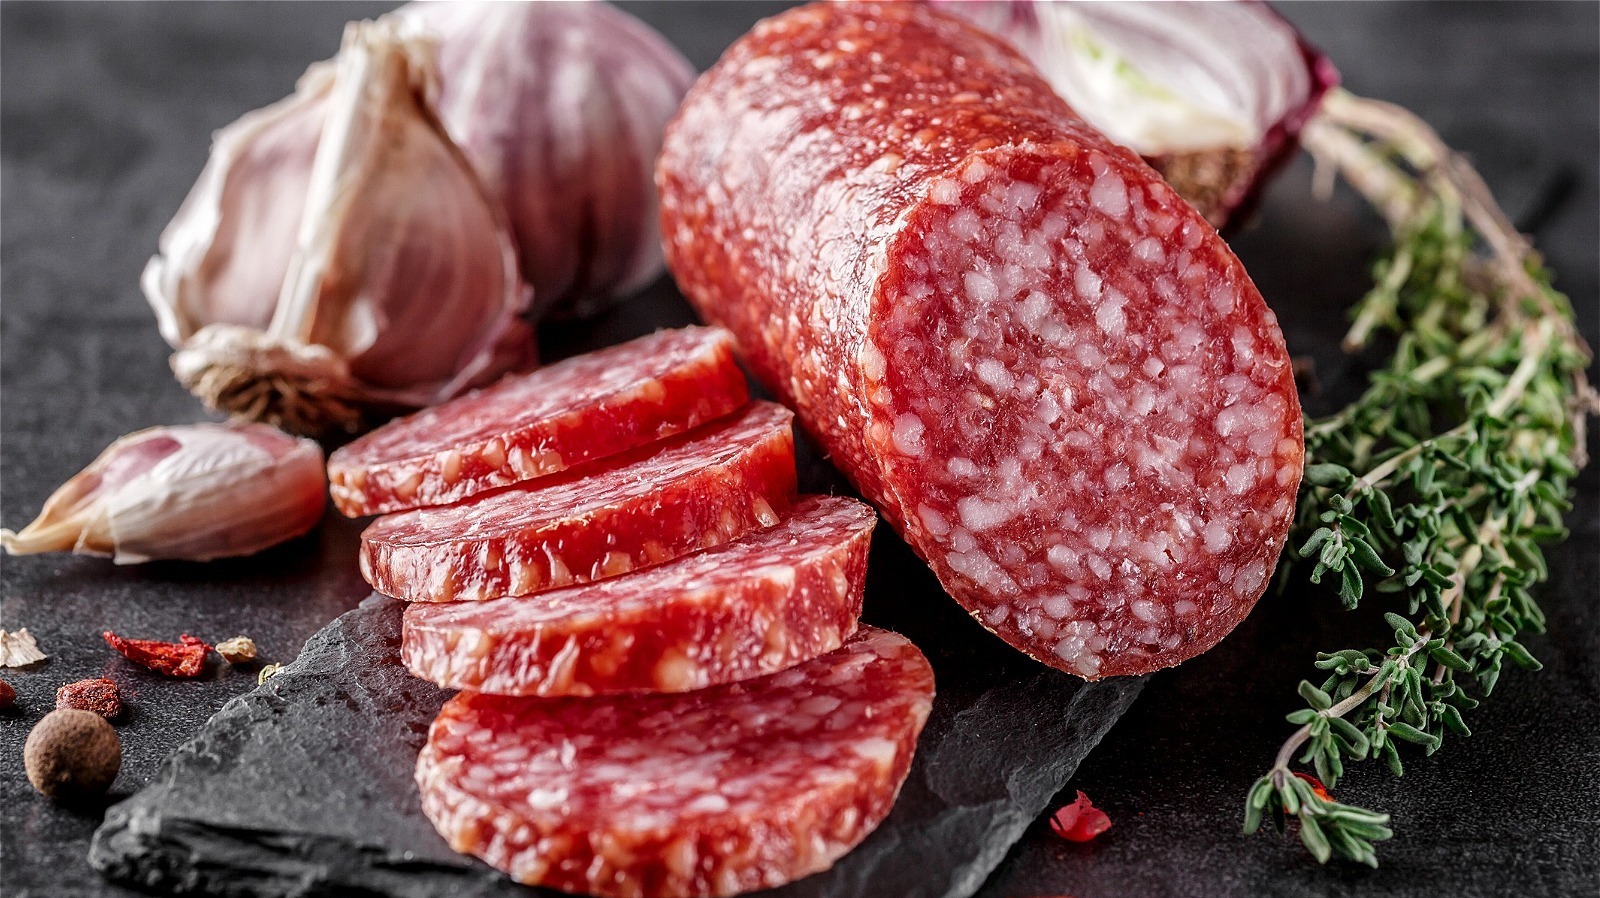 What Is Salami And Is It Nutritious?